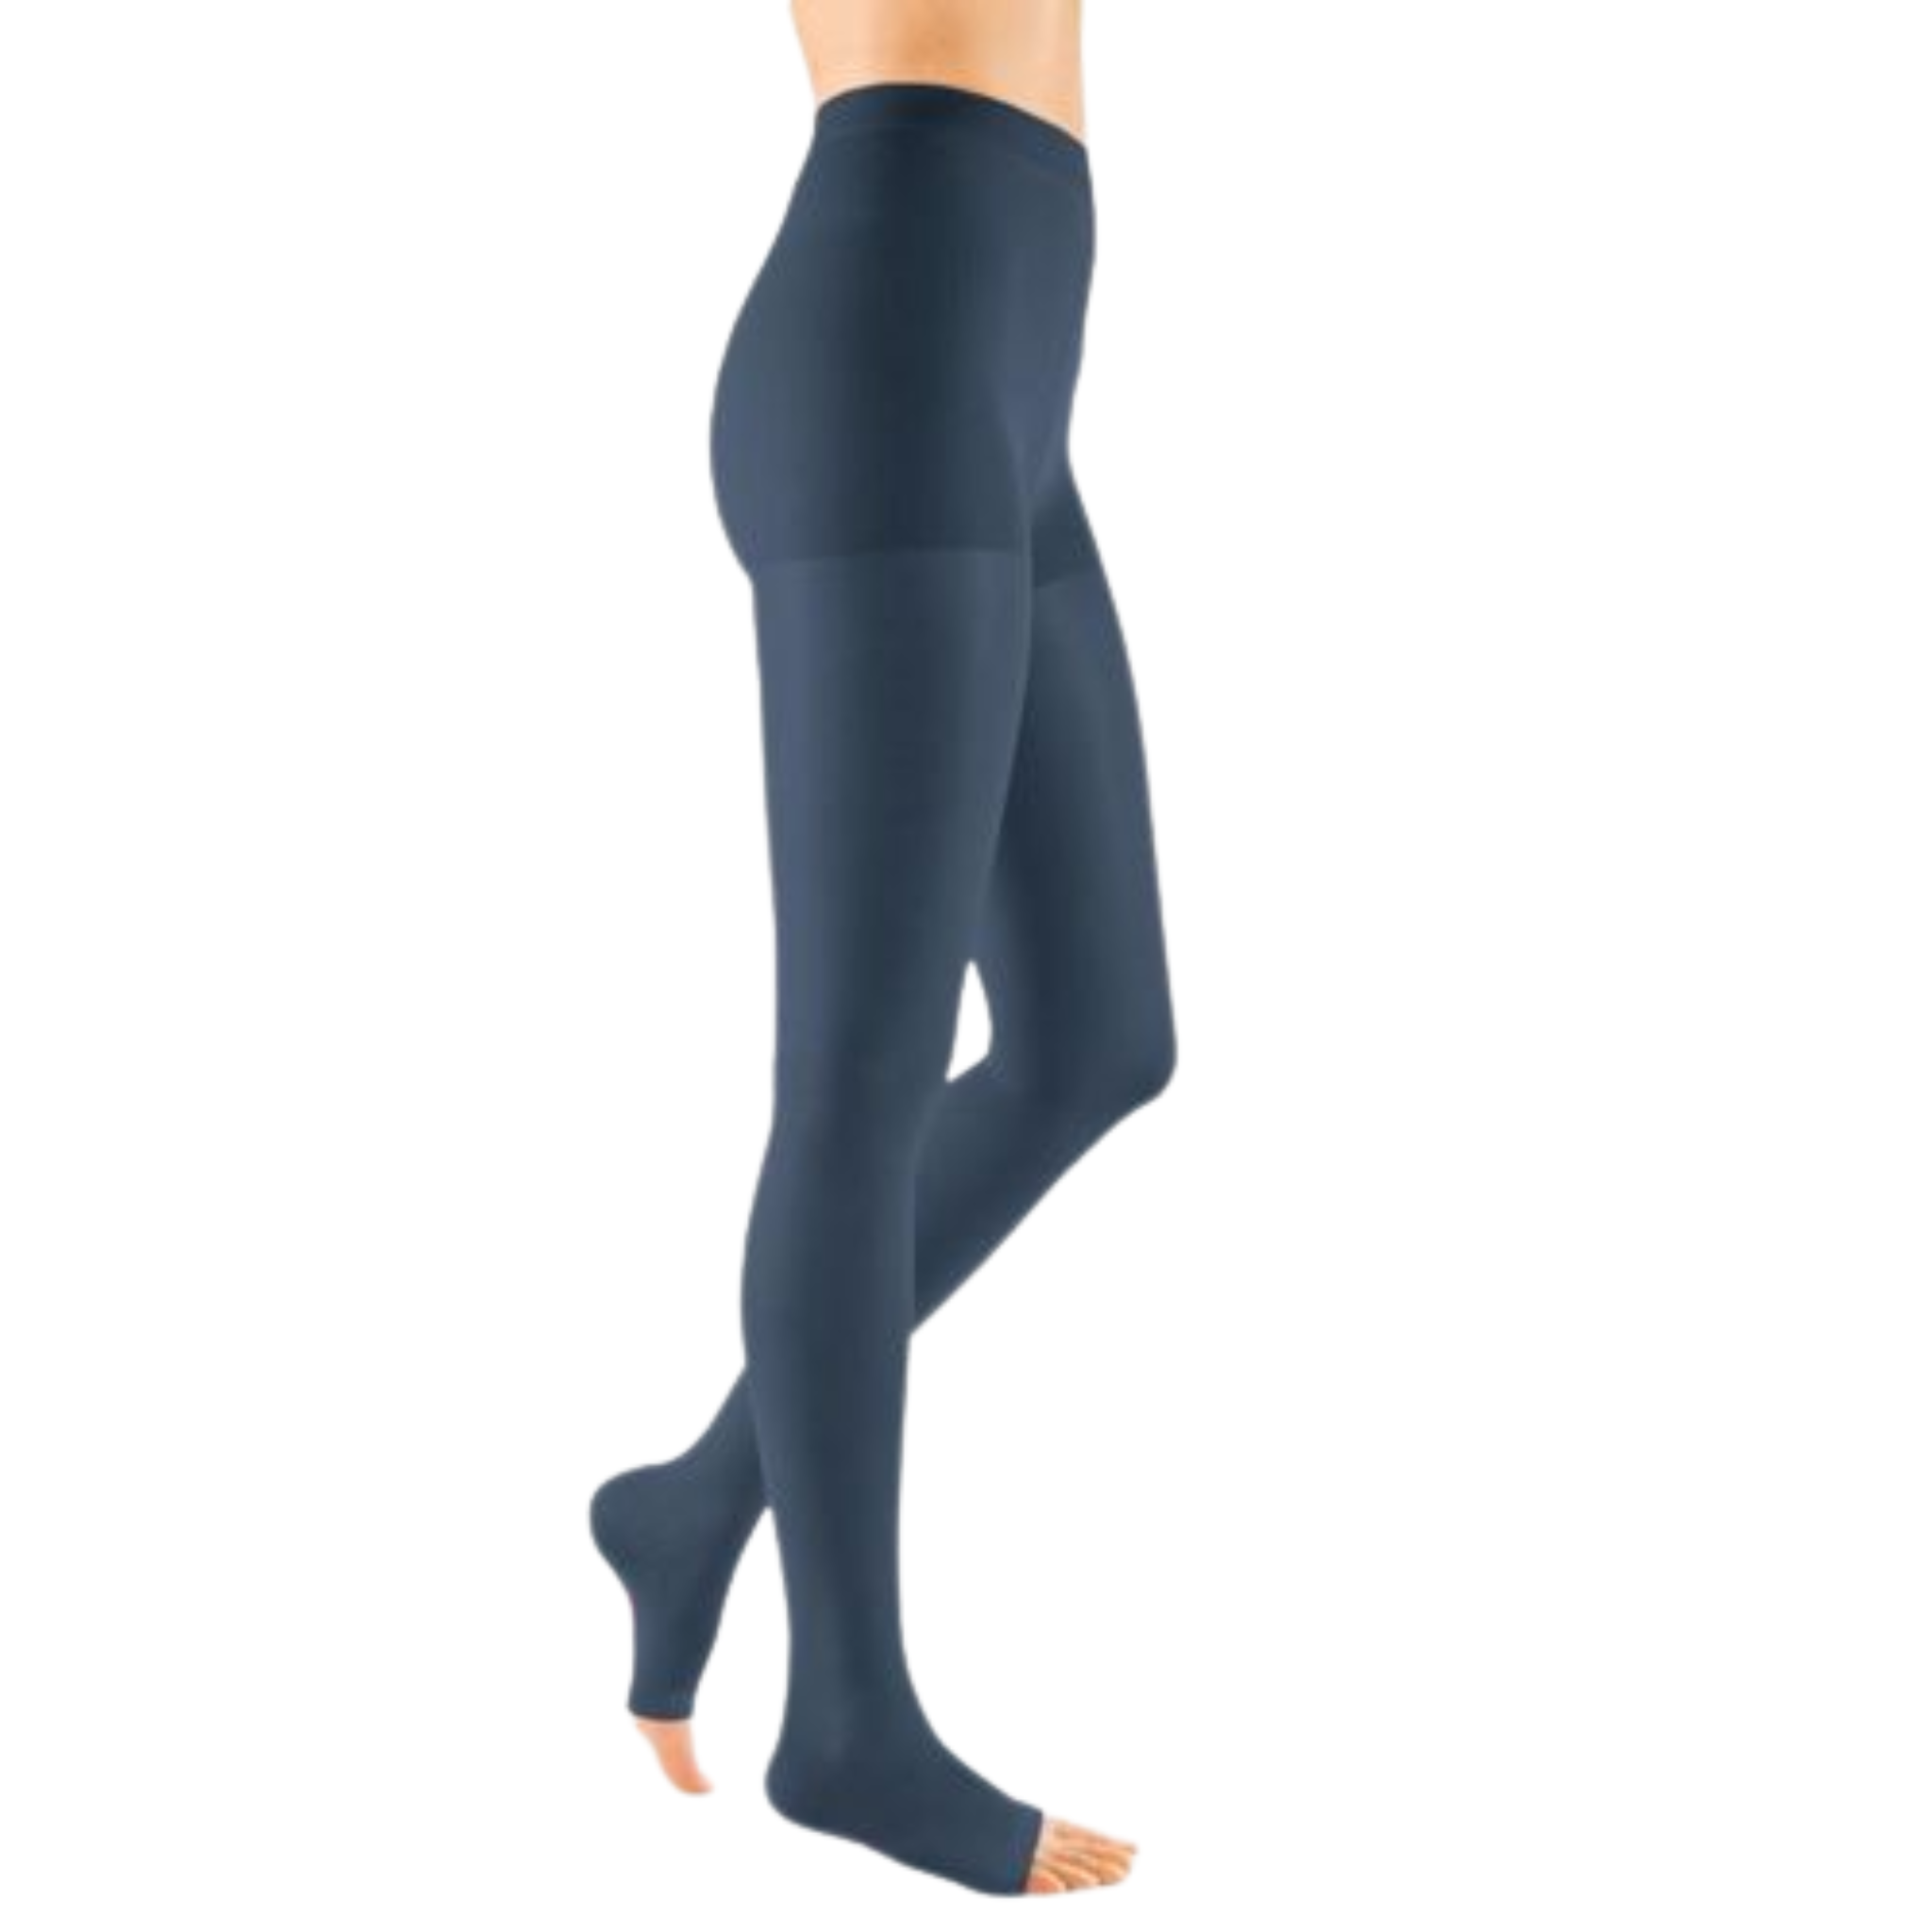 Compression Stockings, Pantyhose, Open Toe, Navy